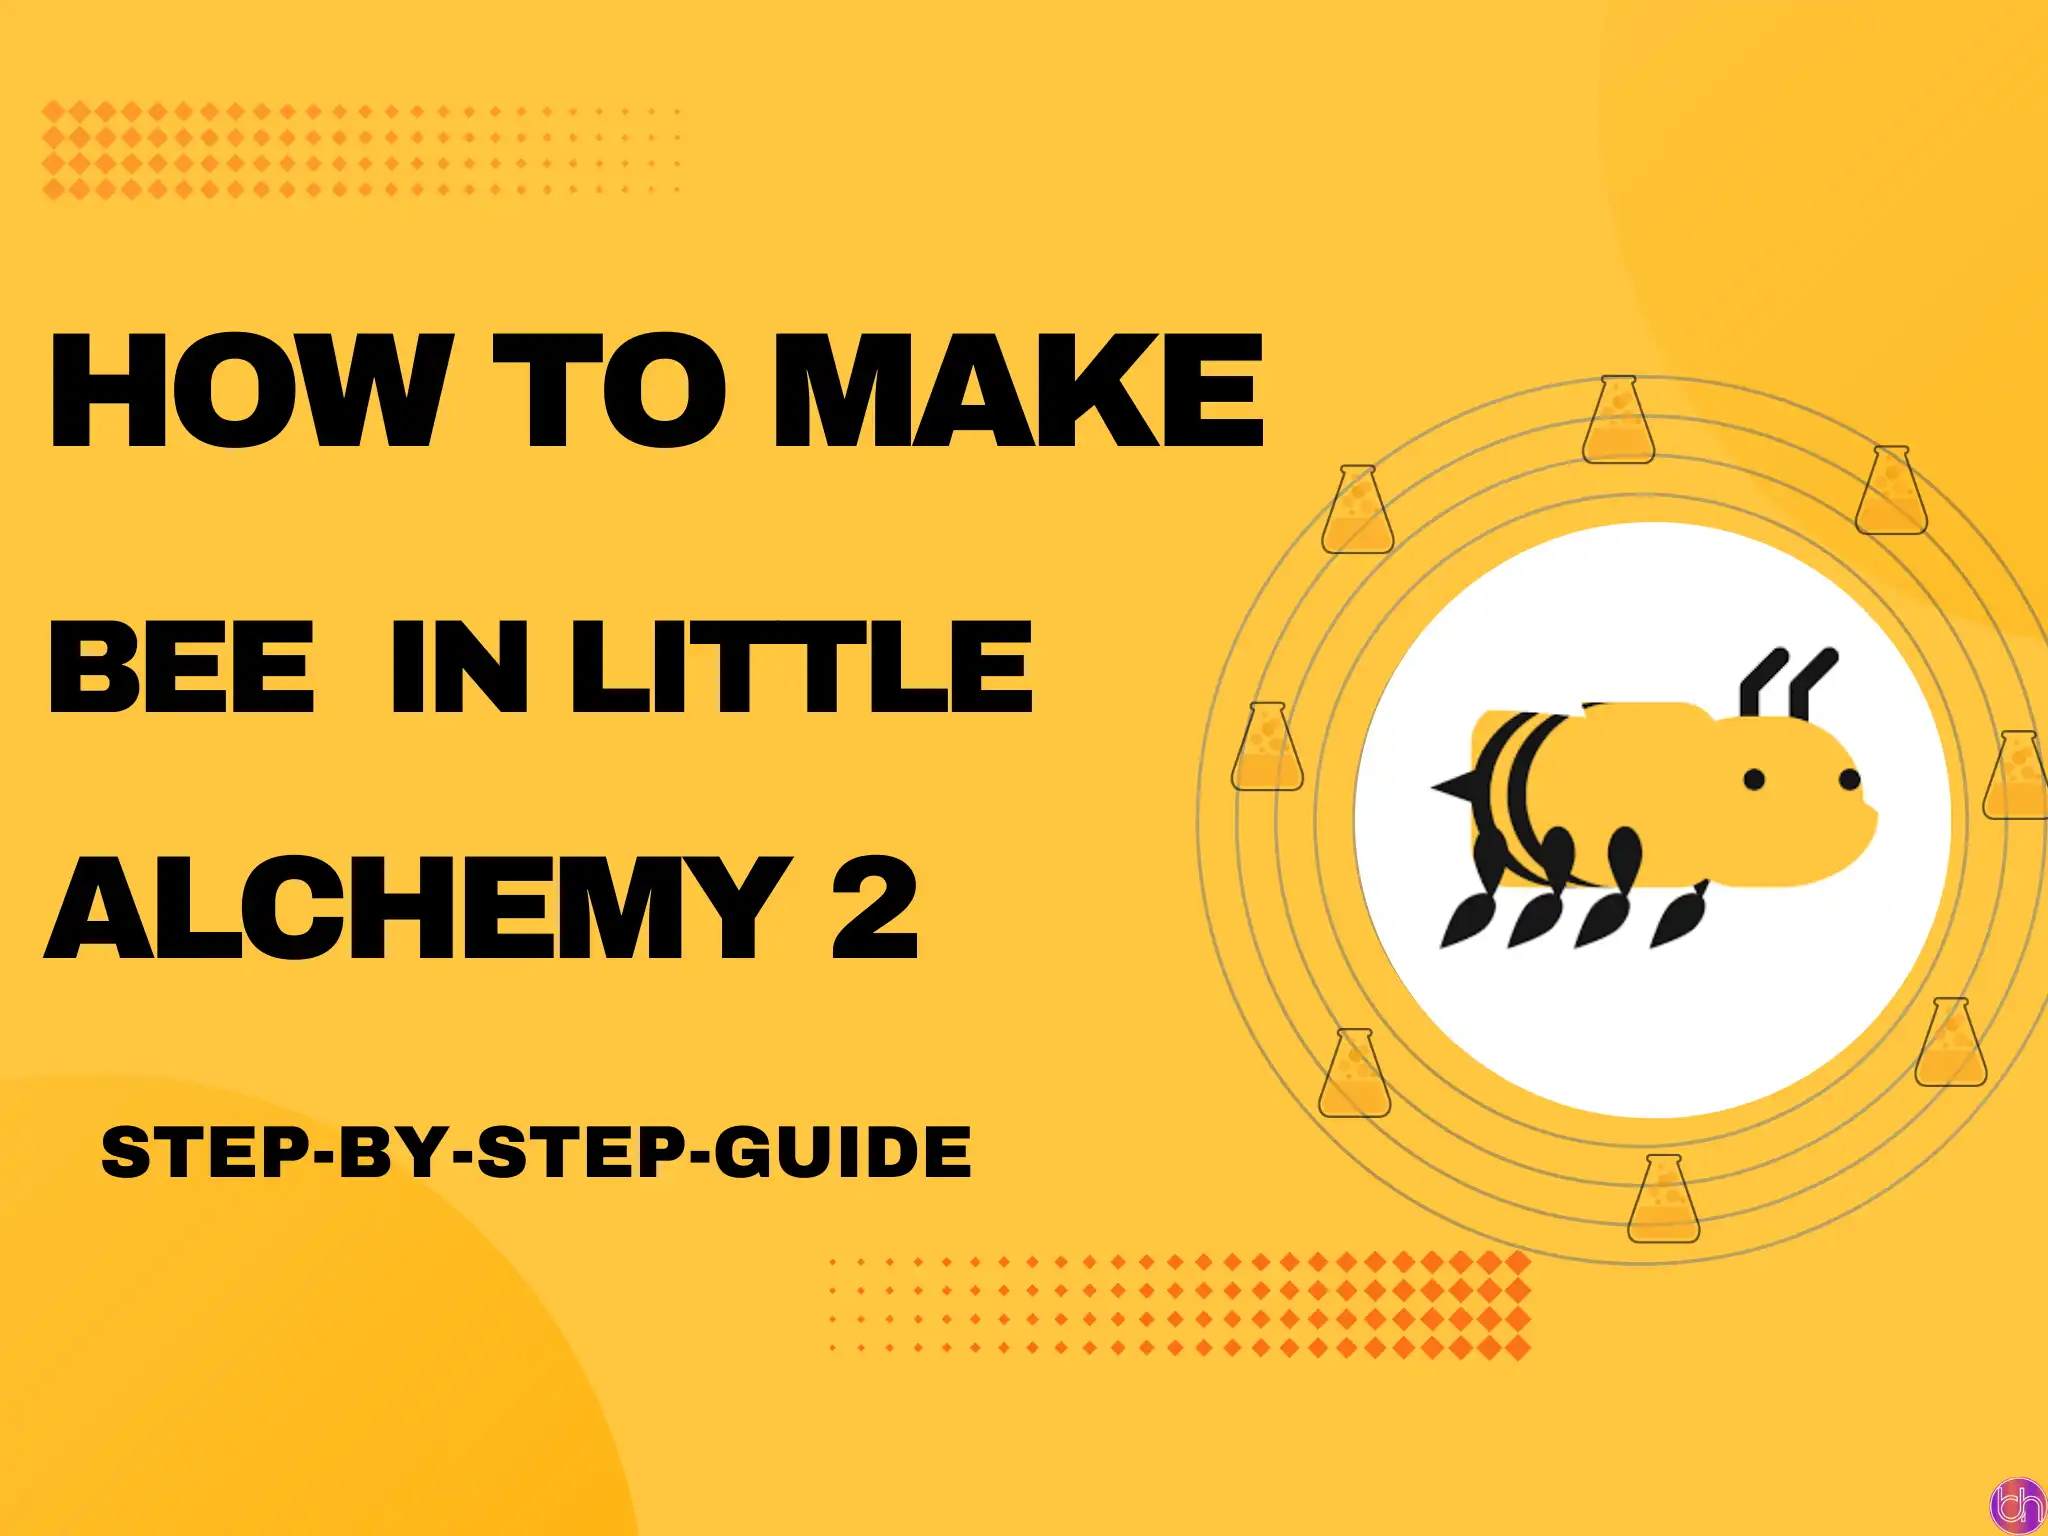 How to make Bee in Little Alchemy 2